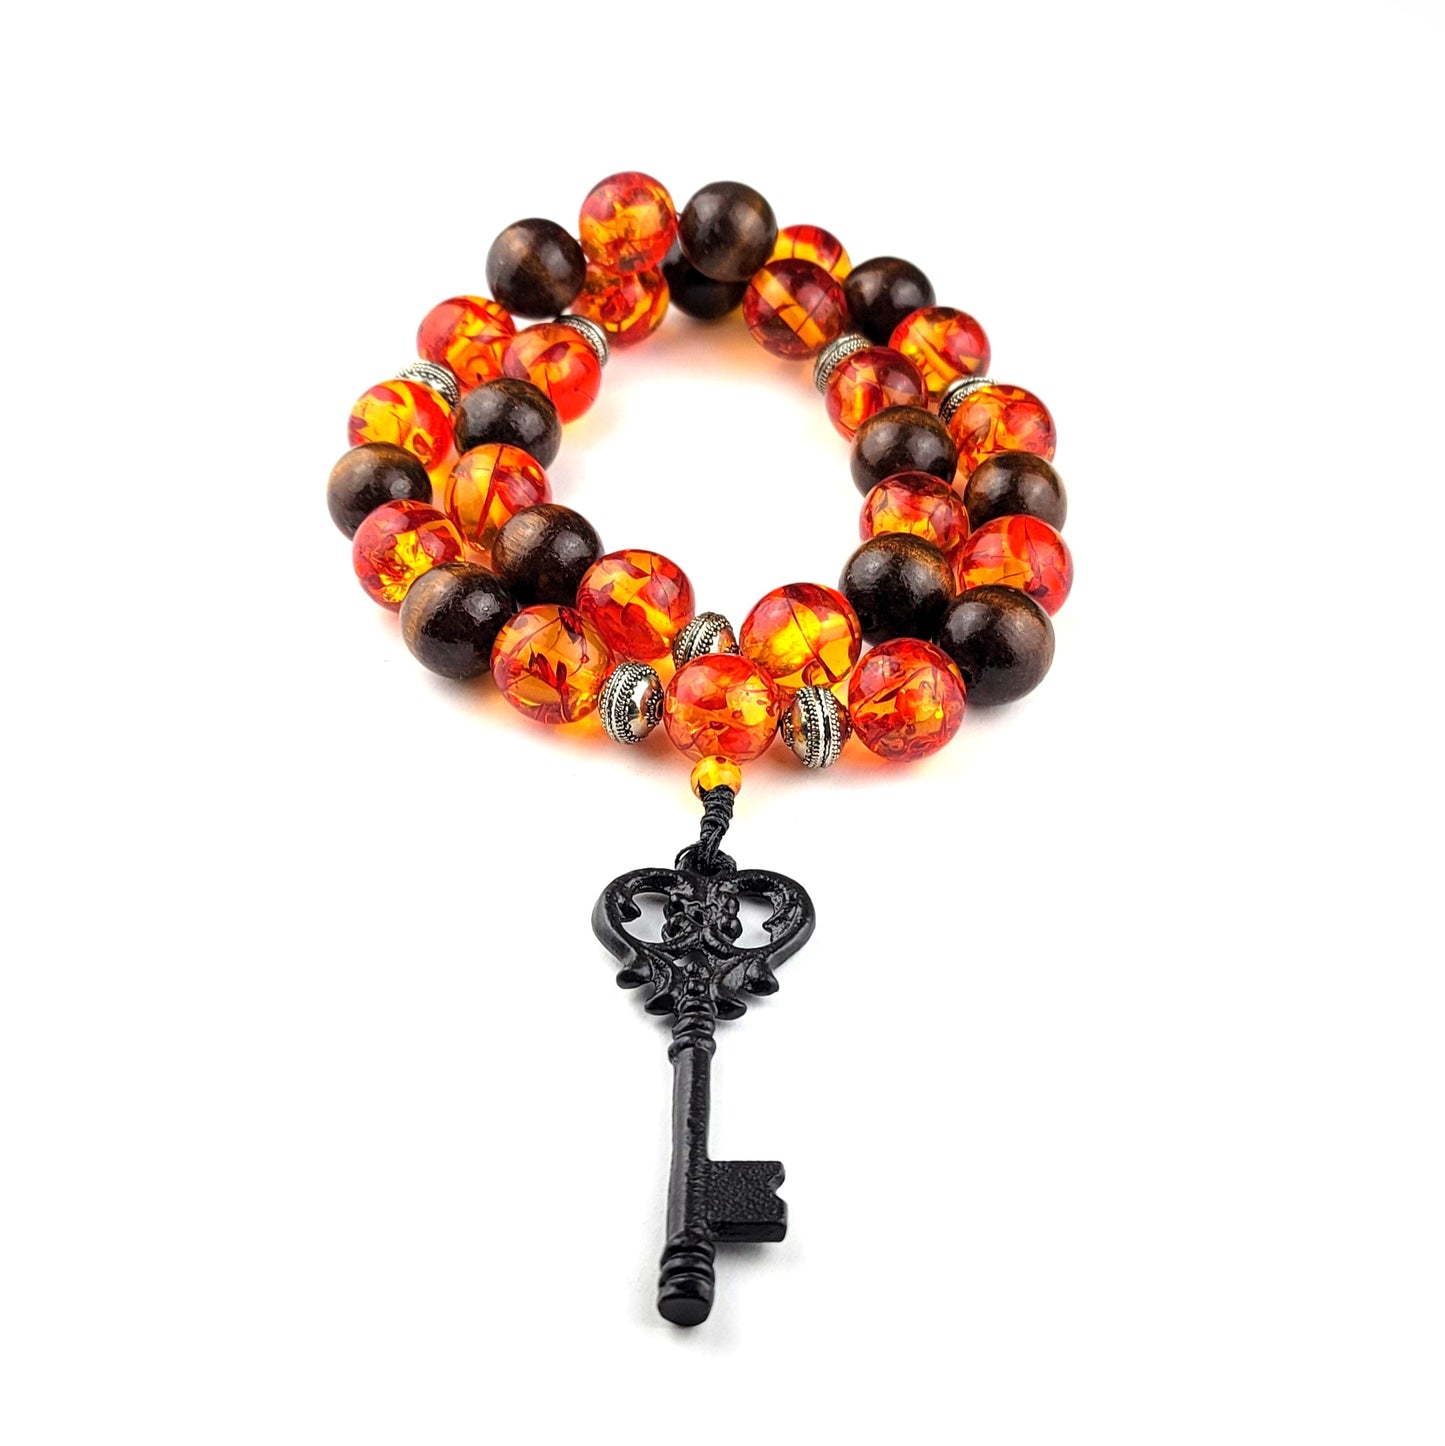 Synthetic Amber, Bodhi Wood Grand Master Mala Necklace by J.J. Dean